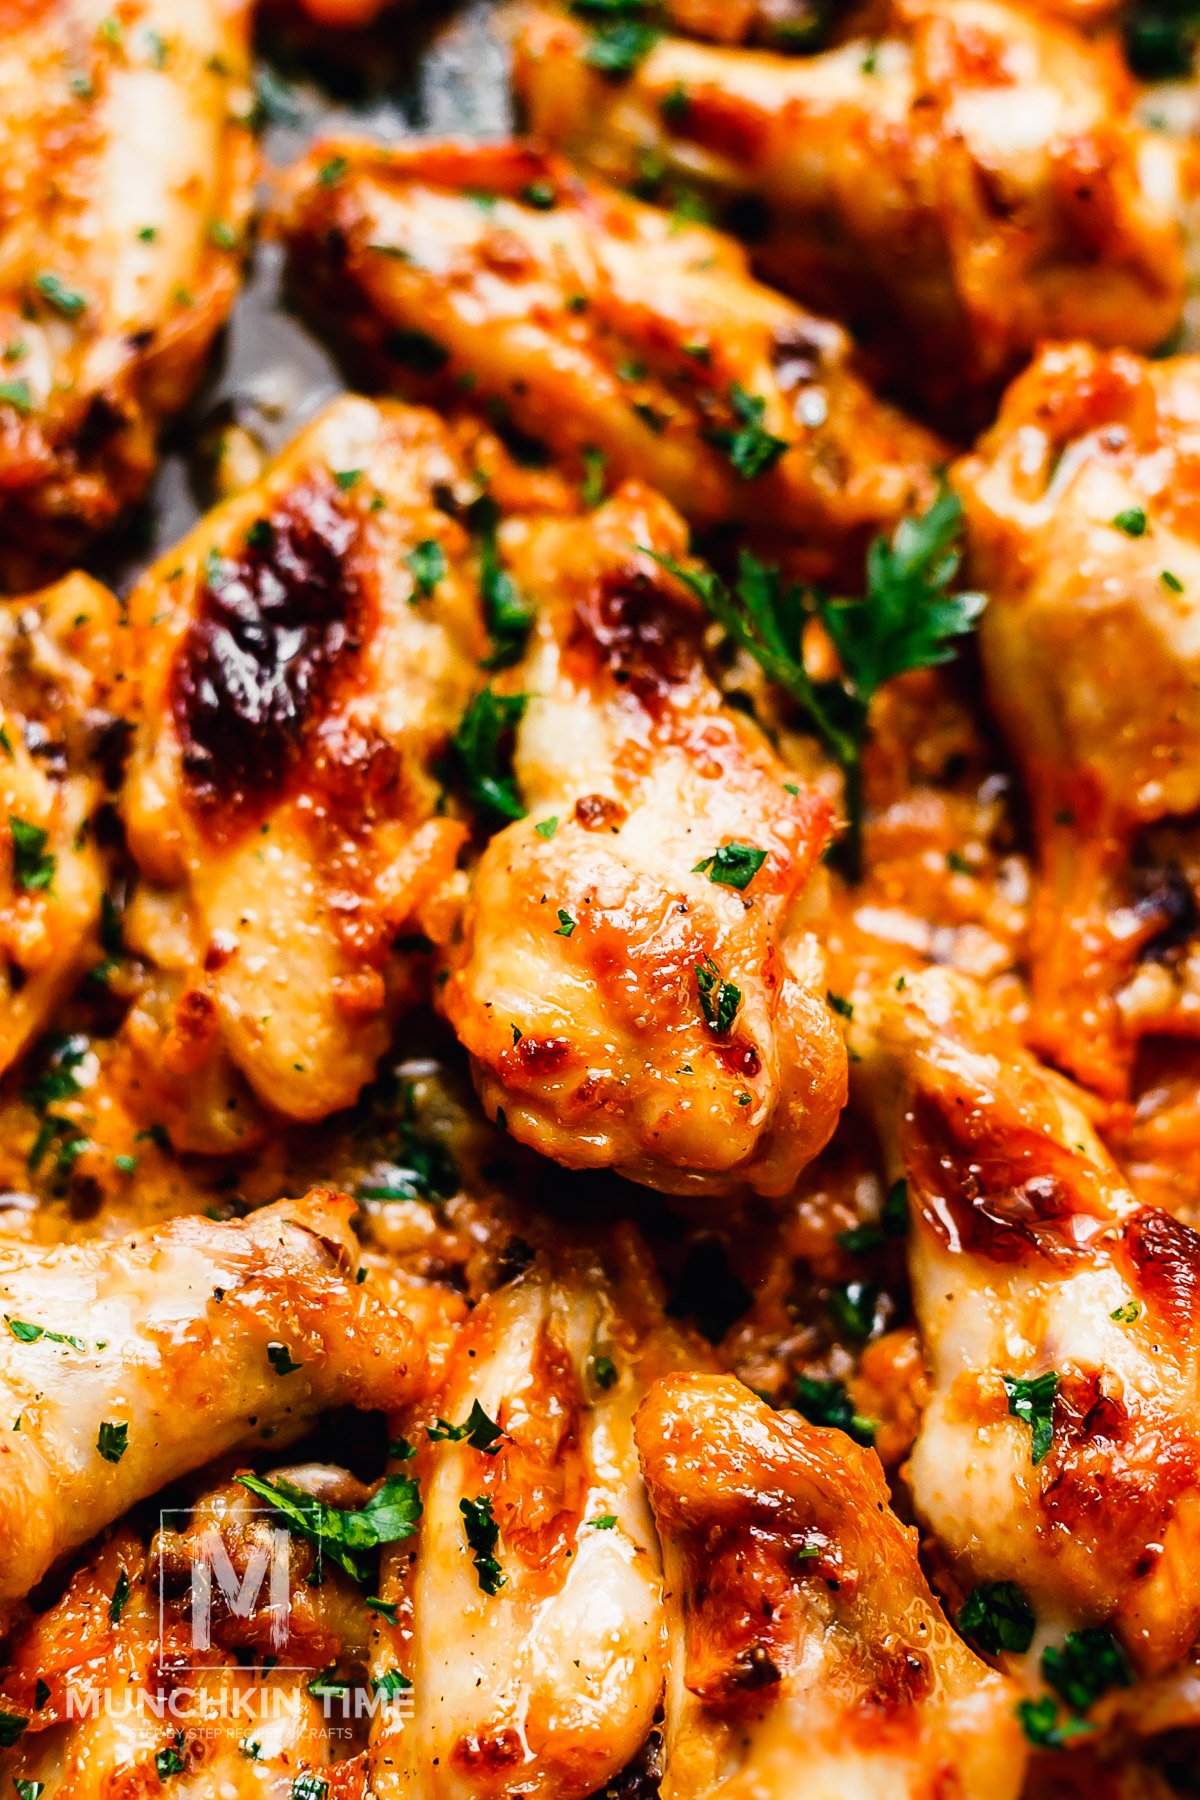  These Baked Chicken Wings taste amazing when marinated in ketchup, mayo and garlic.  